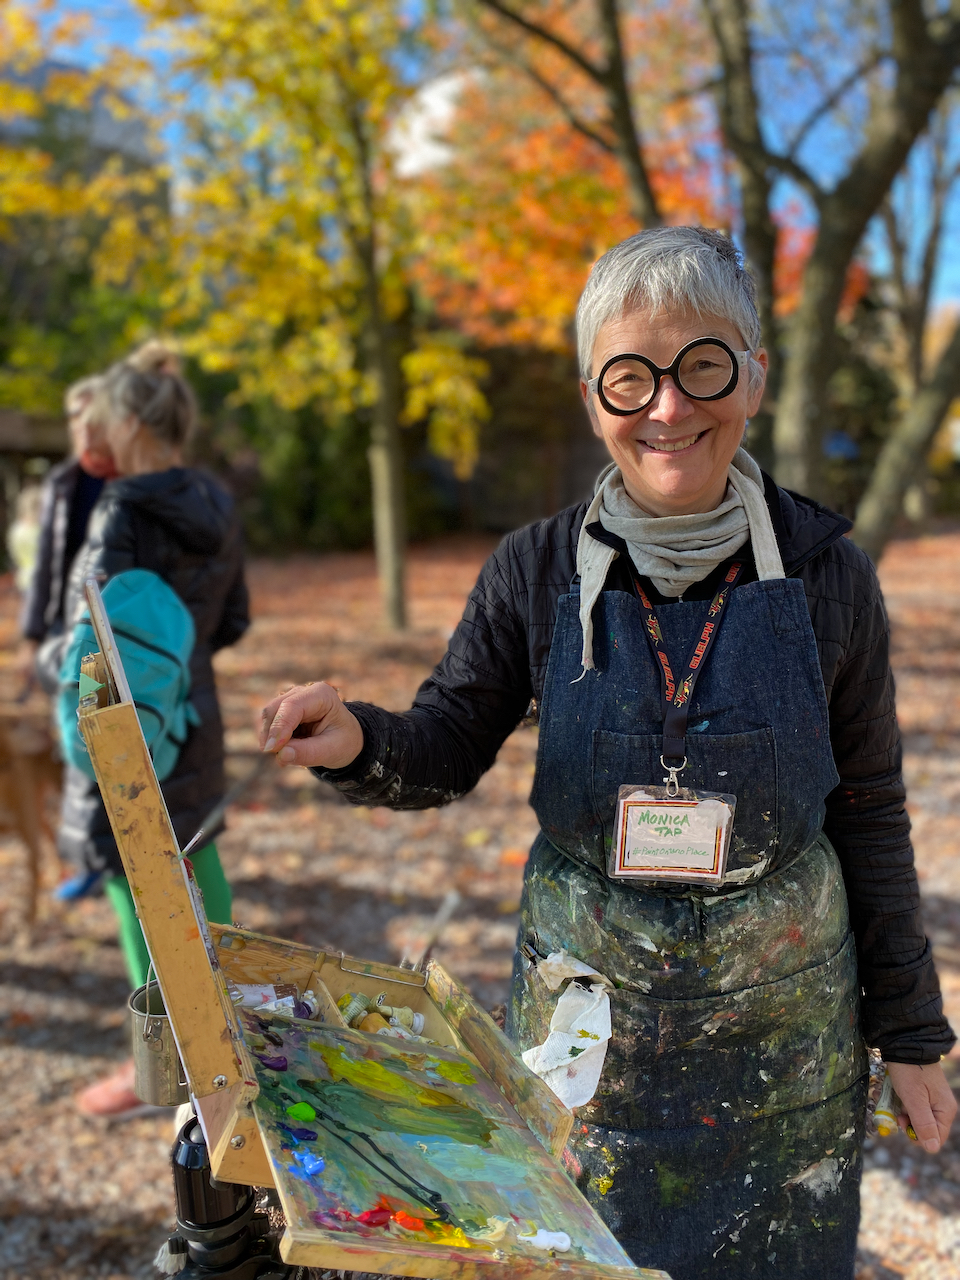 The Ontario government spent $2 million on advertising to build support for its proposal to privatize Ontario Place. Despite this, protesters have held demonstrations every weekend since Fall 2023 against the mega-spa, including artist Monica Tap who joined numerous “paint-ins” to capture the beauty of the mature forest on the West Island.